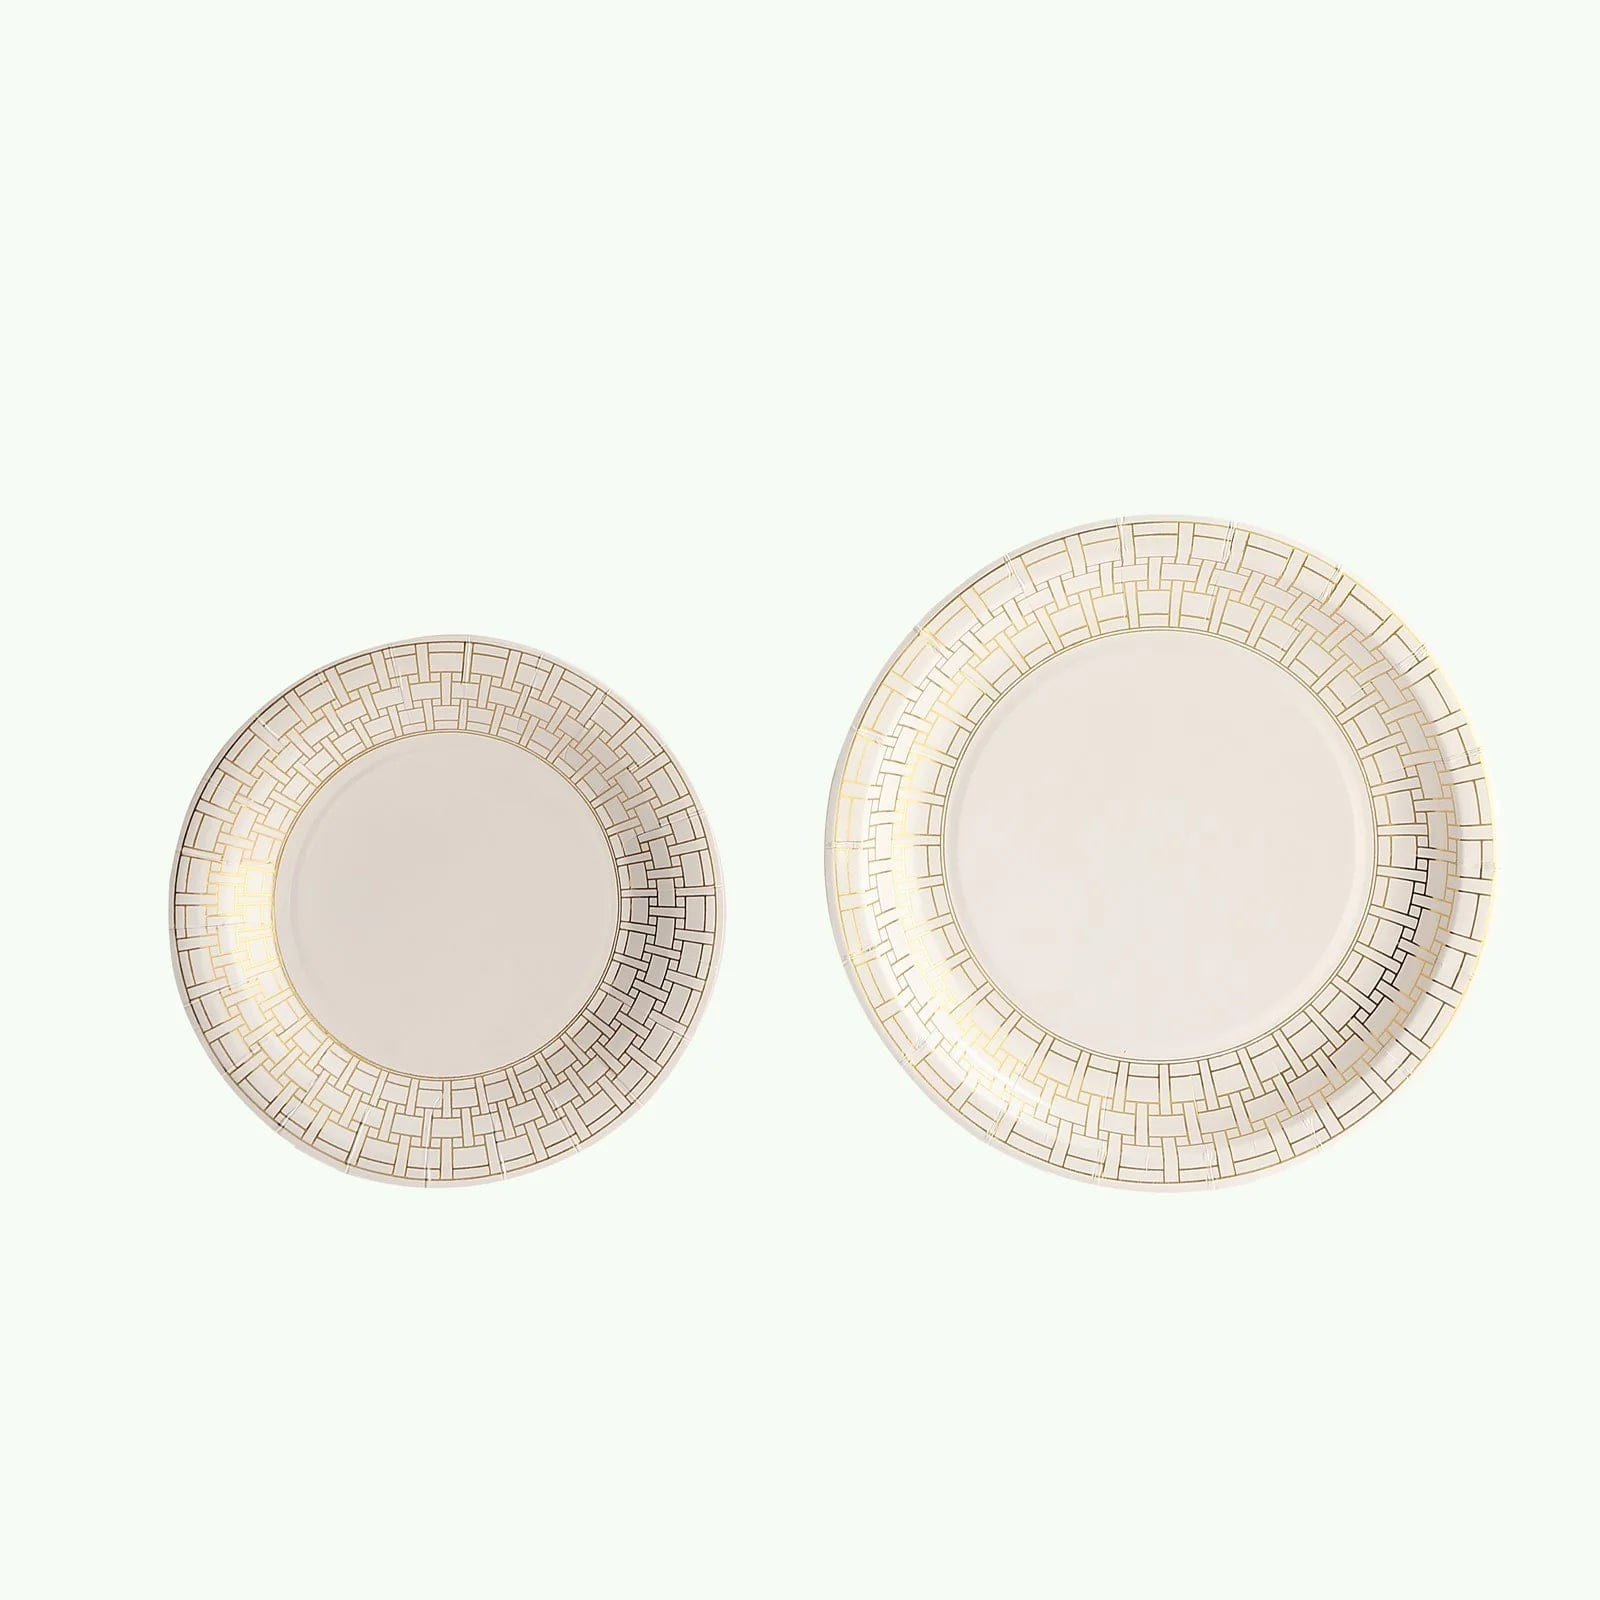 25 White Round Disposable Paper Plates with Gold Basketweave Design Rim